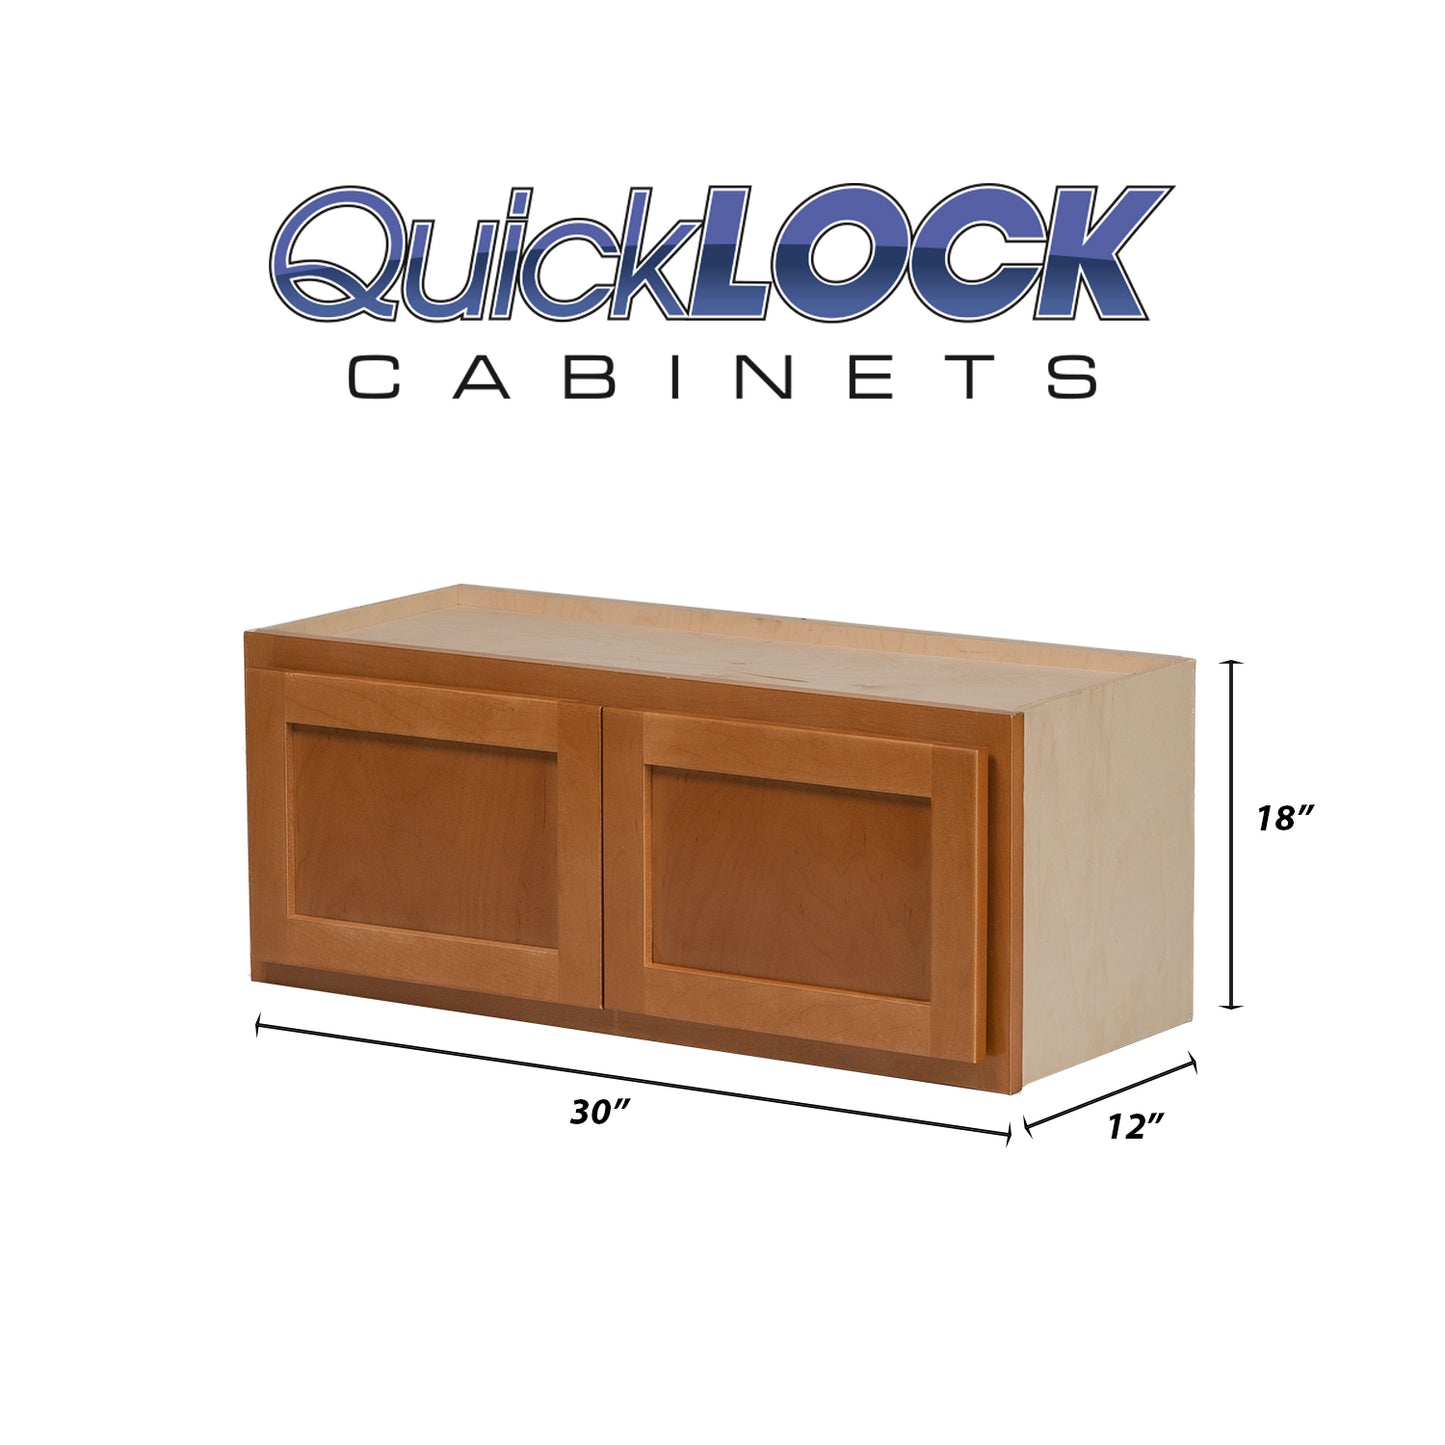 Quicklock RTA (Ready-to-Assemble) Provincial Stain 30"Wx18"Hx12"D Microwave Wall Cabinet